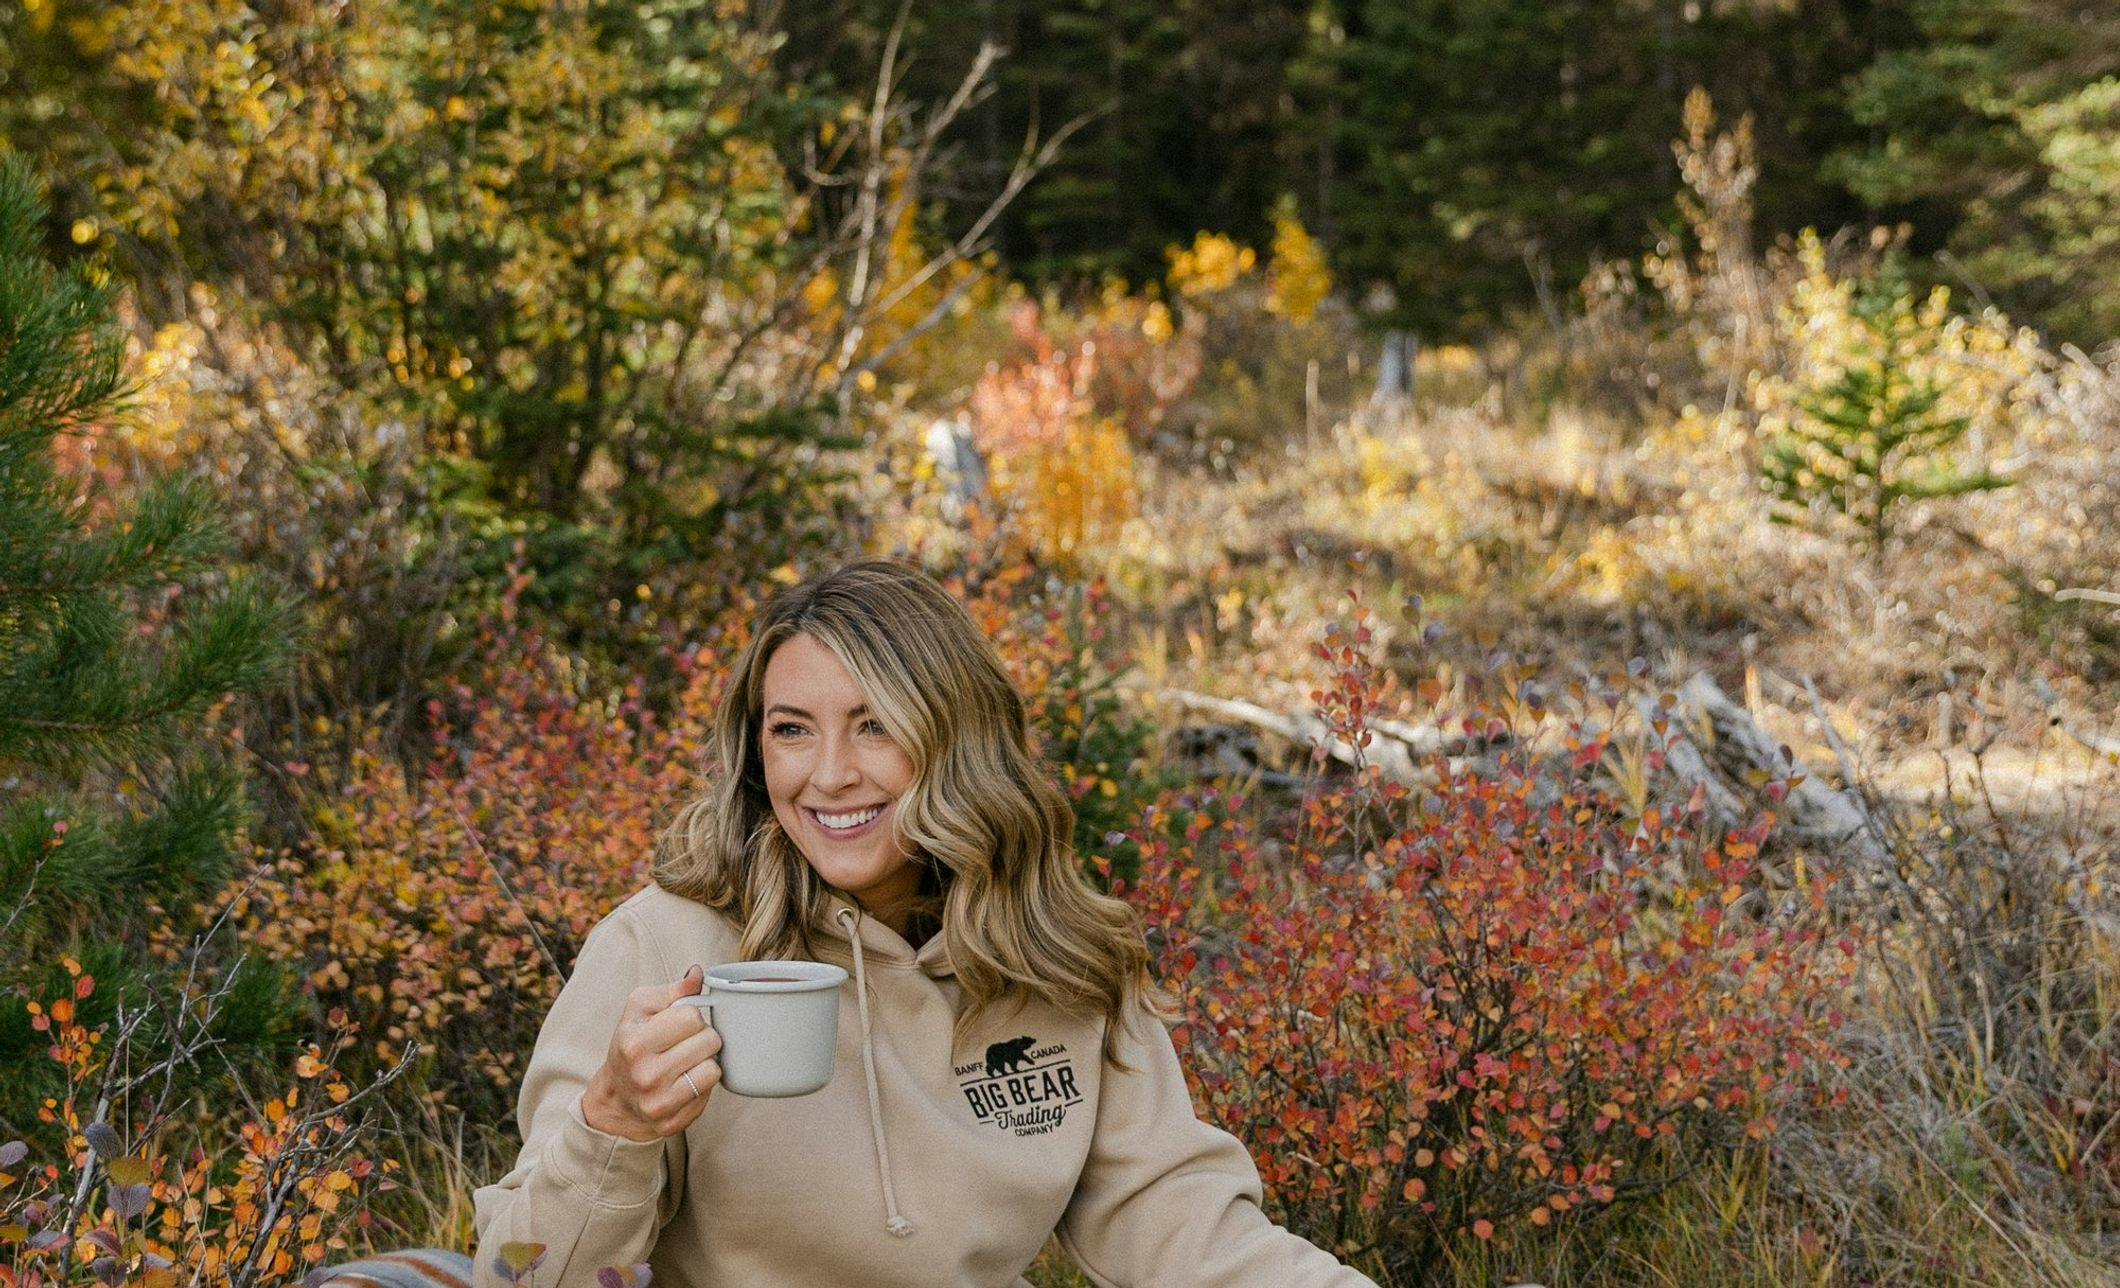 Female relaxing on a cozy blanket with a cup of coffee and an oversized sweater. Fall foliage in the background